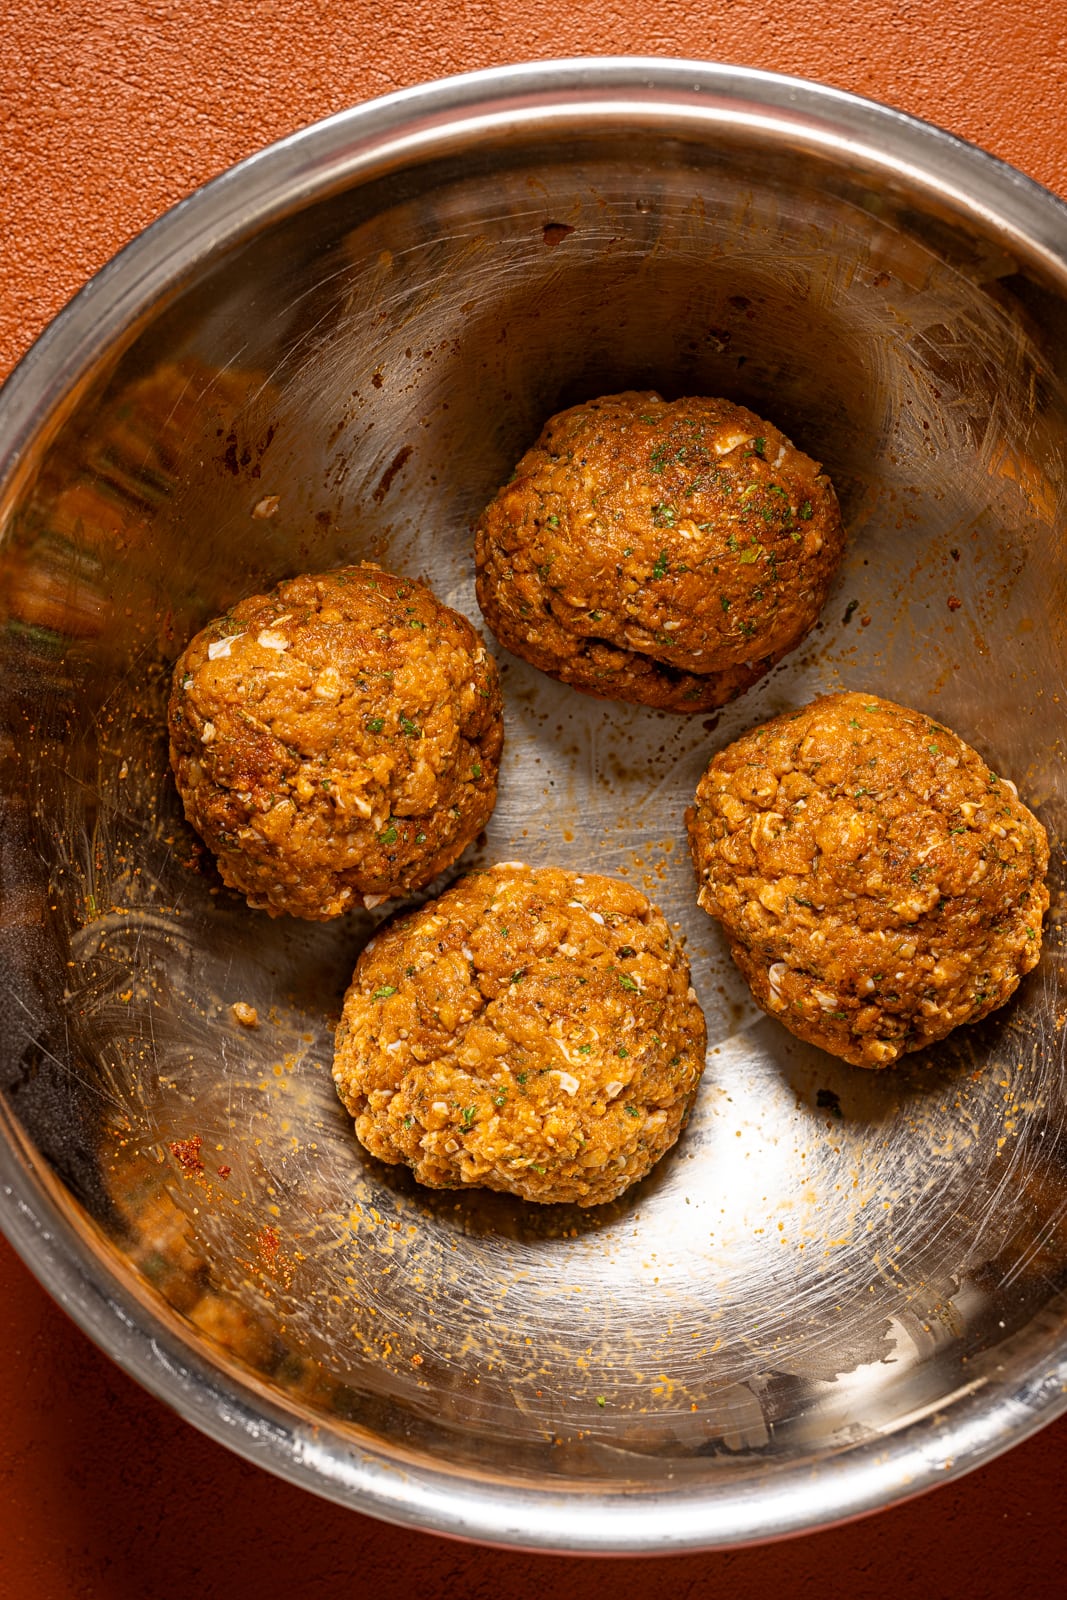 Four burger patties formed in a silver bowl.